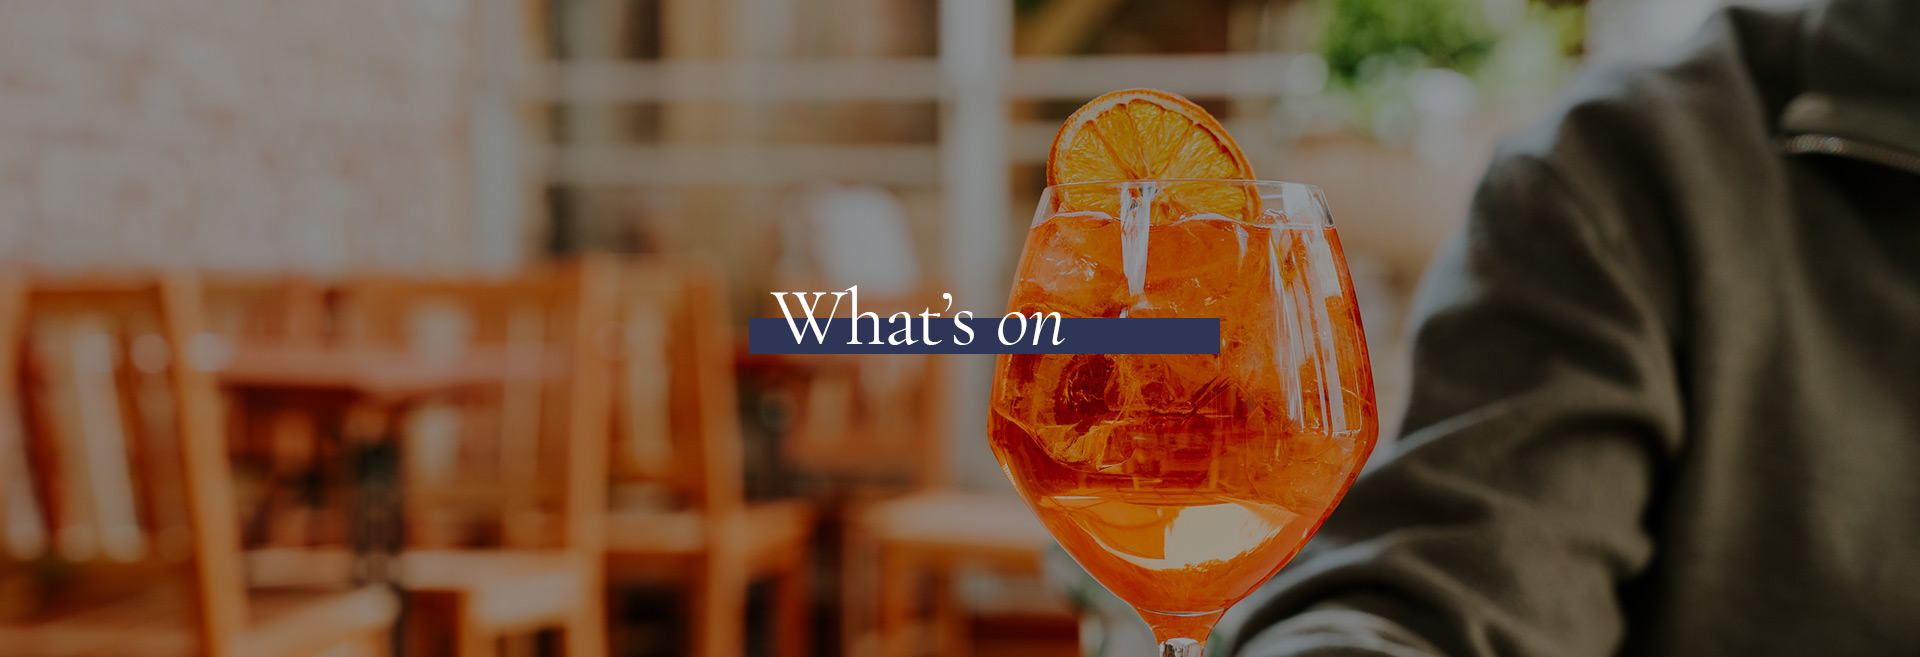 What's On at Crown & Greyhound